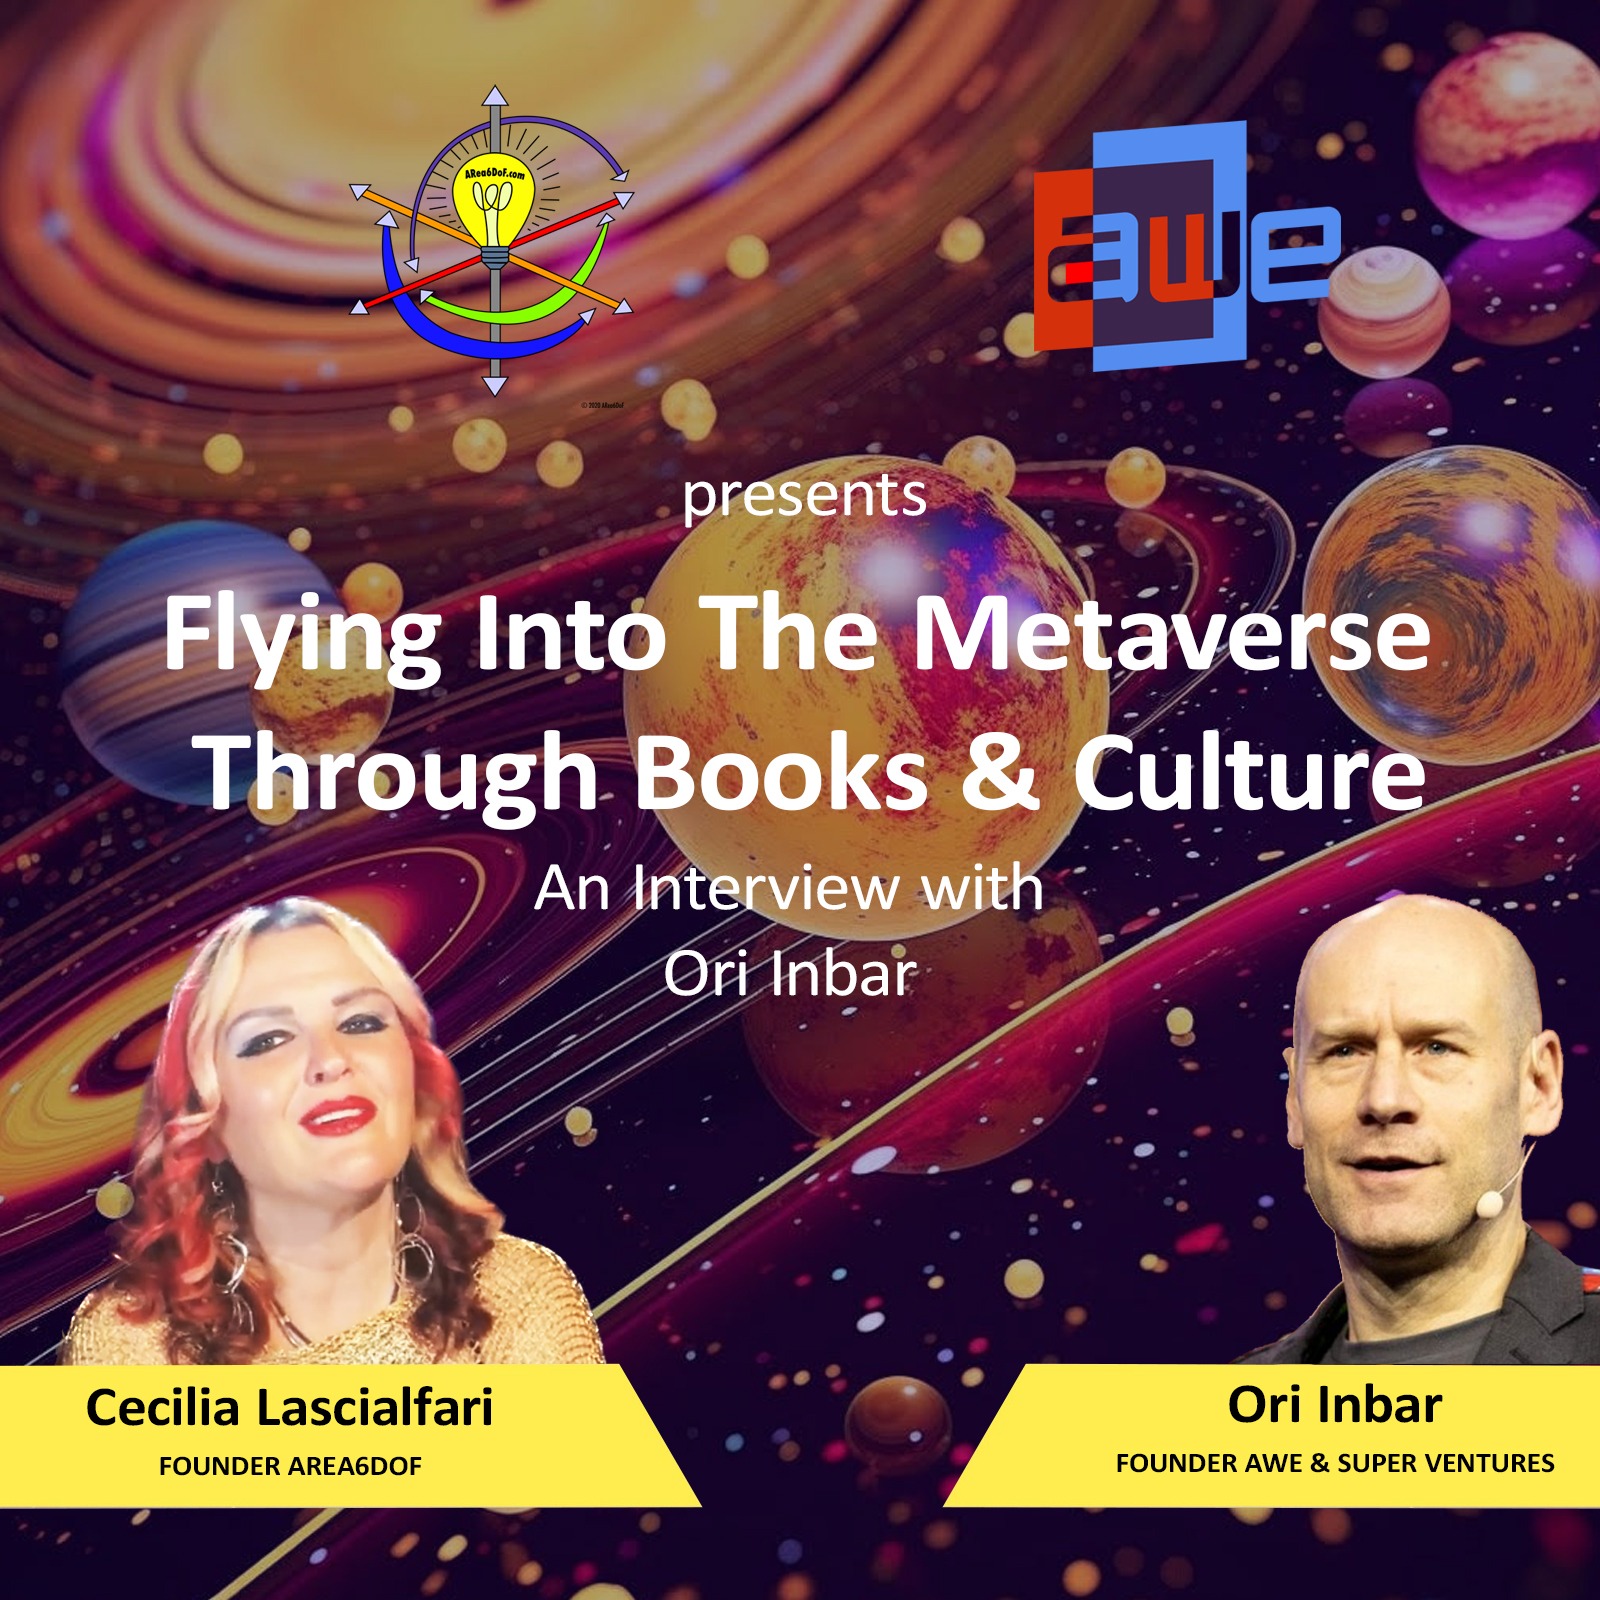 ORI INBAR at “Flying Into The Metaverse Through Books & Culture” – AWE (Augmented World Expo)